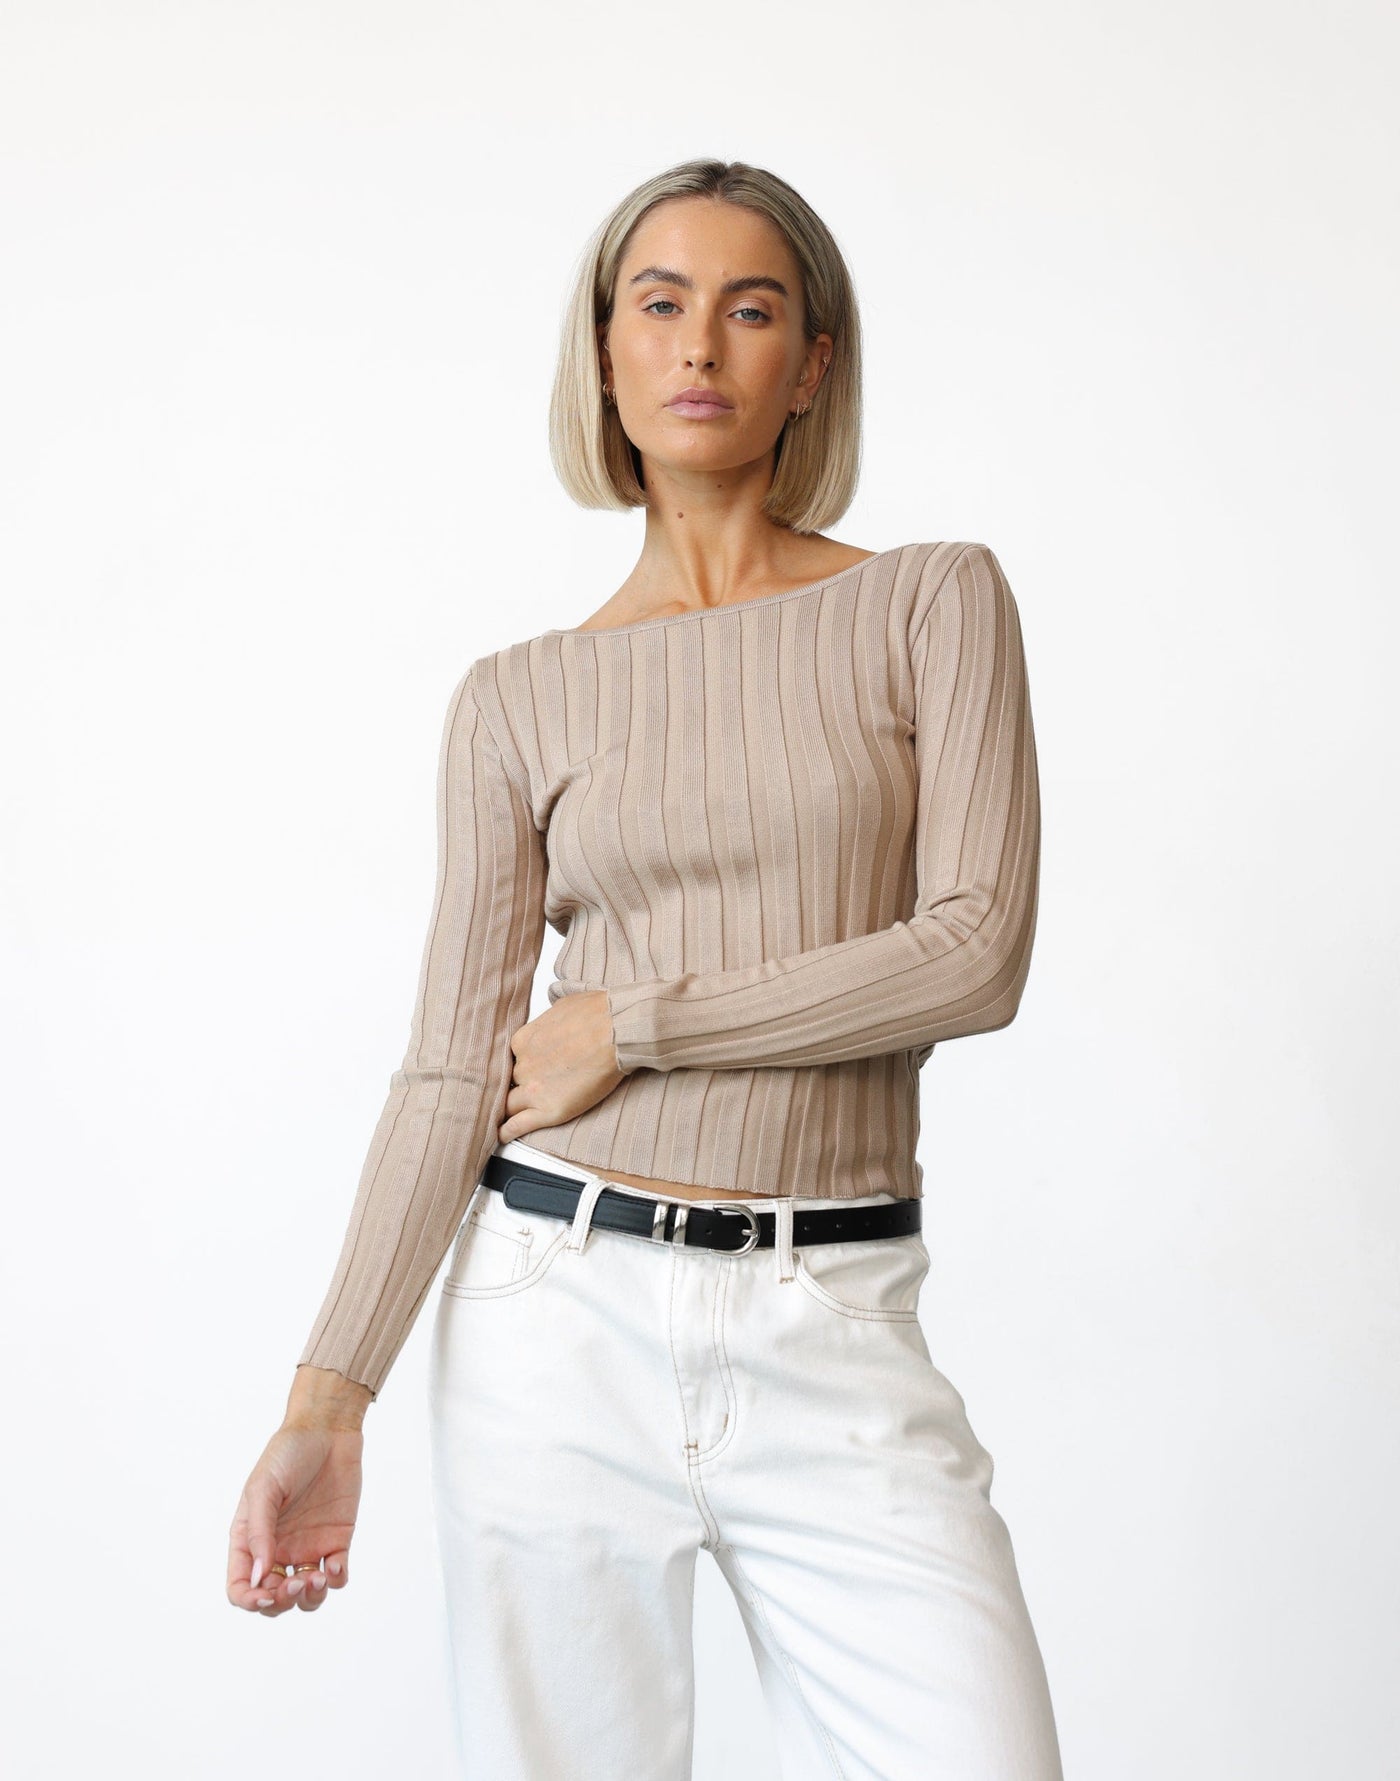 Danai Top (Camel) - Ribbed High Boat Neck Long Sleeve Top - Women's Top - Charcoal Clothing